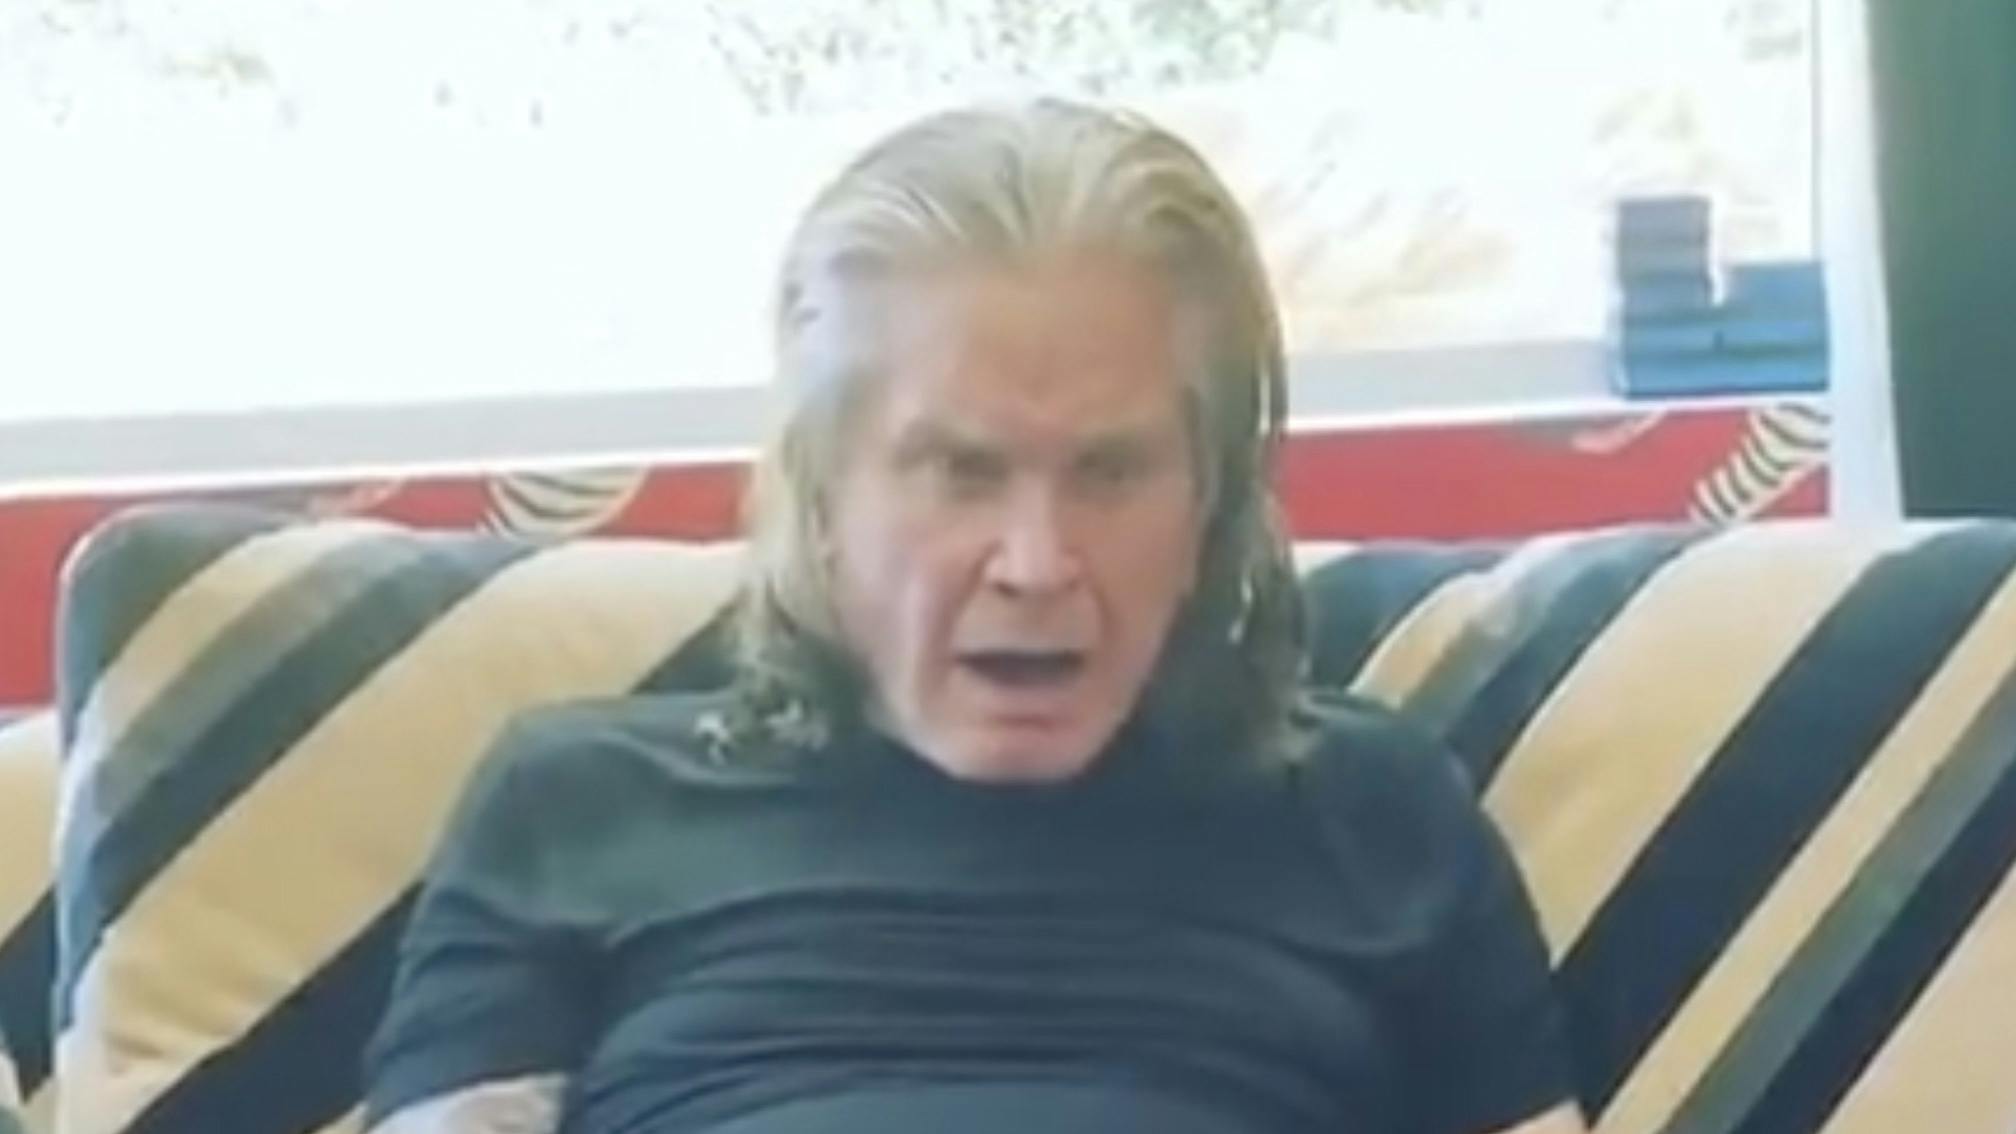 “I’ve never heard this before!”: Ozzy reacts to Crazy Train sample in Trick Daddy's 2004 rap single Let’s Go